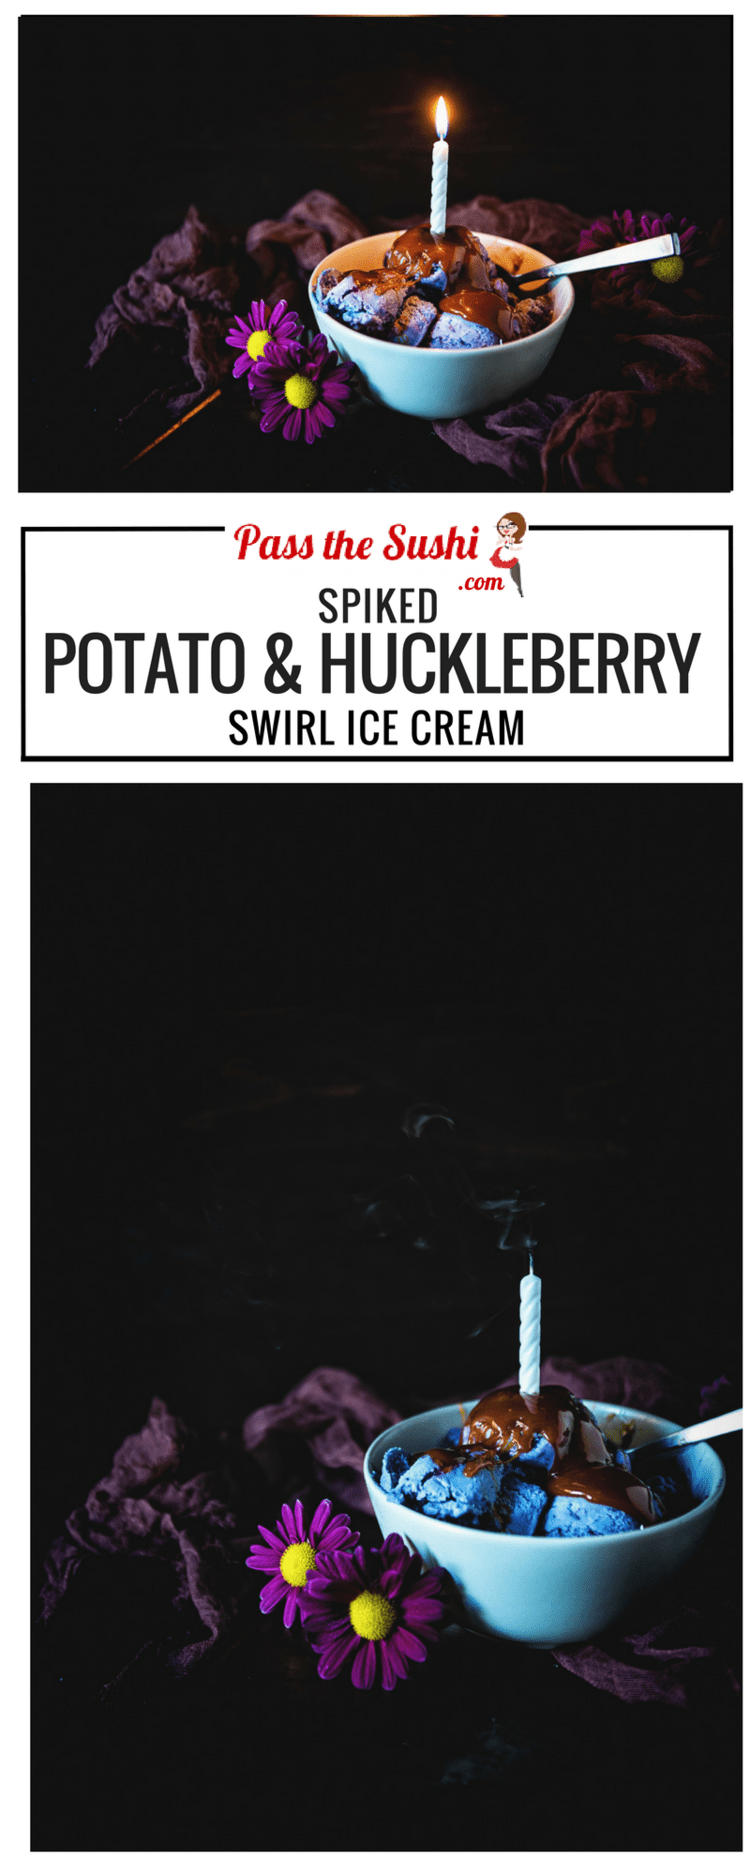 Spiked Potato and Huckleberry Swirl Ice Cream - Challenge your friends to guess the secret ingredient for this smooth and delicious ice cream!